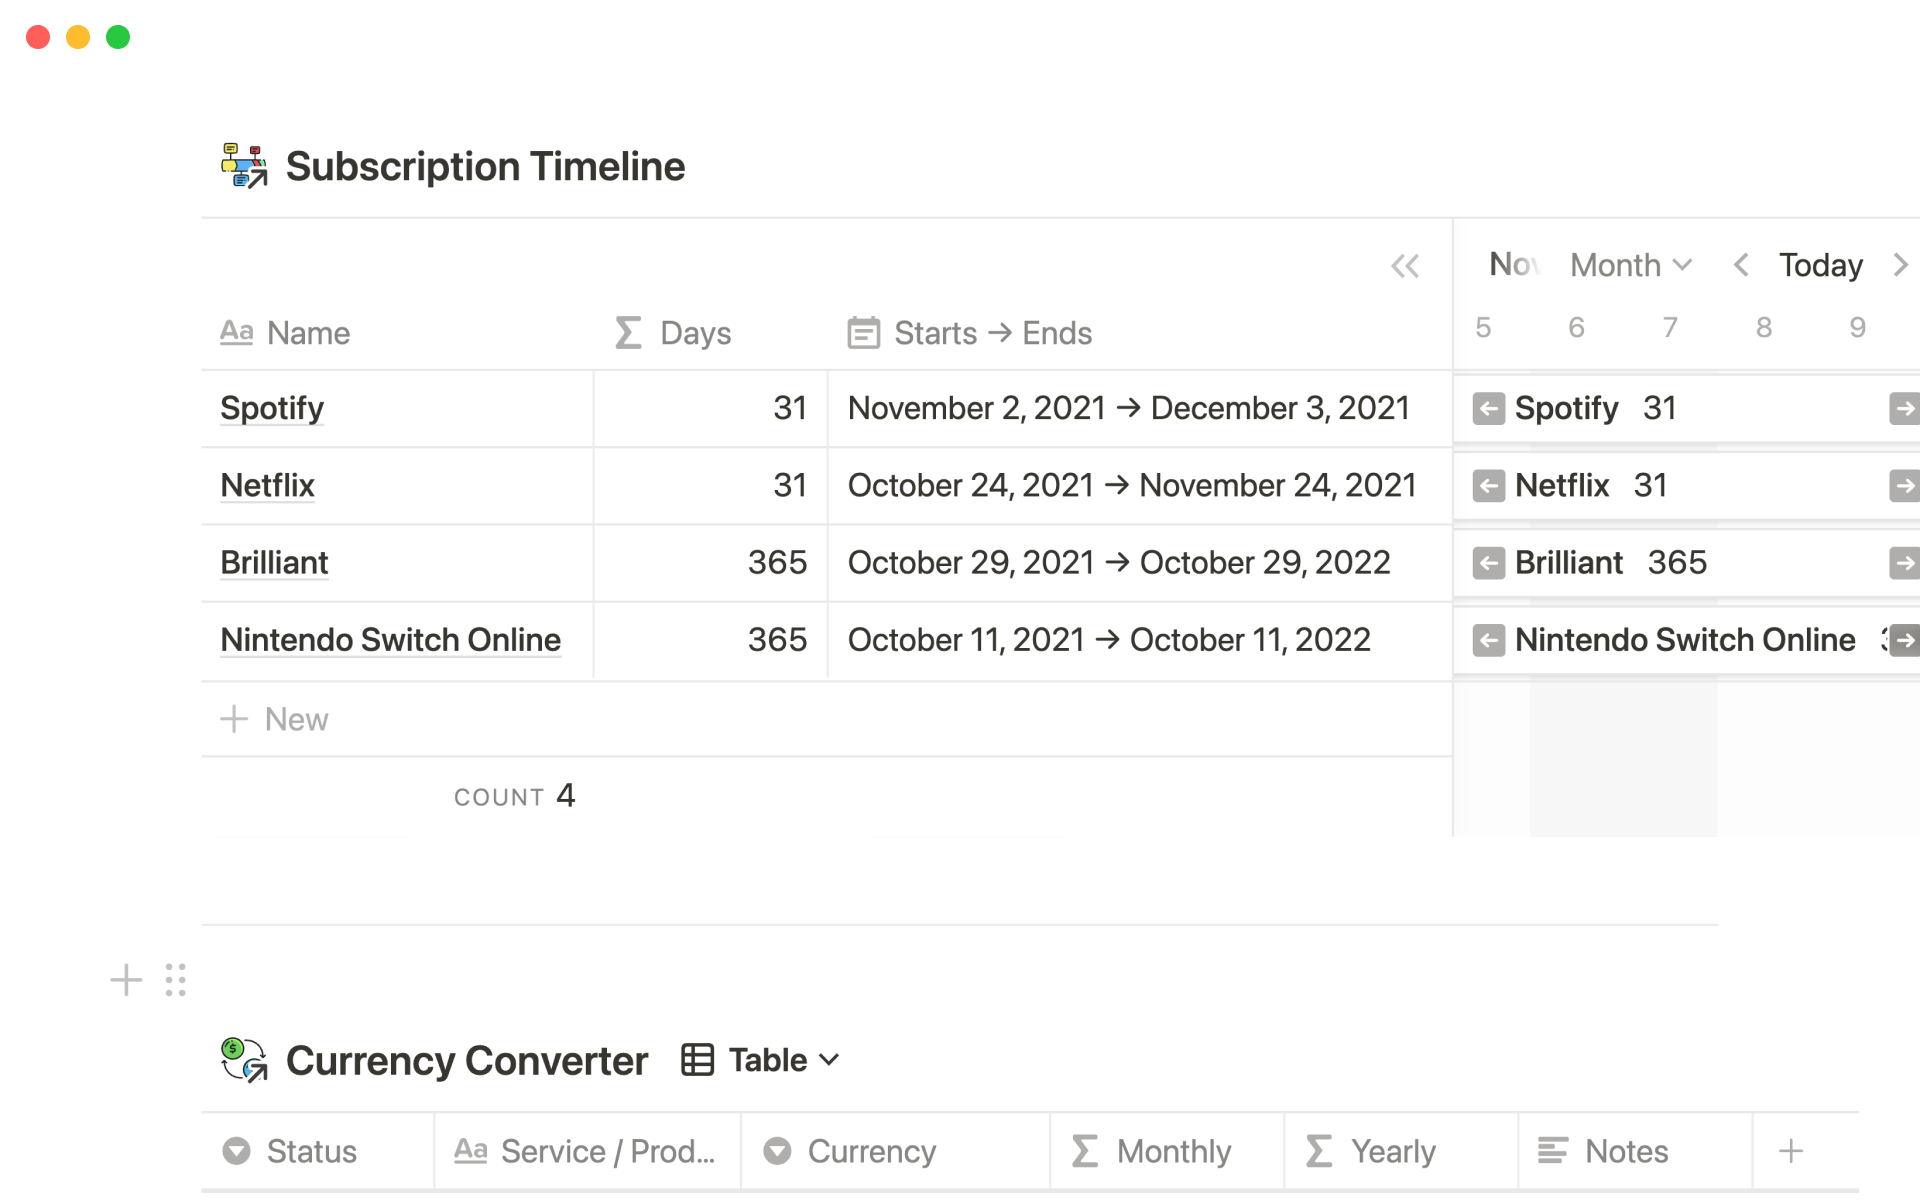 Track your subscriptions, get reminders, view timeline, and convert currencies into your own.